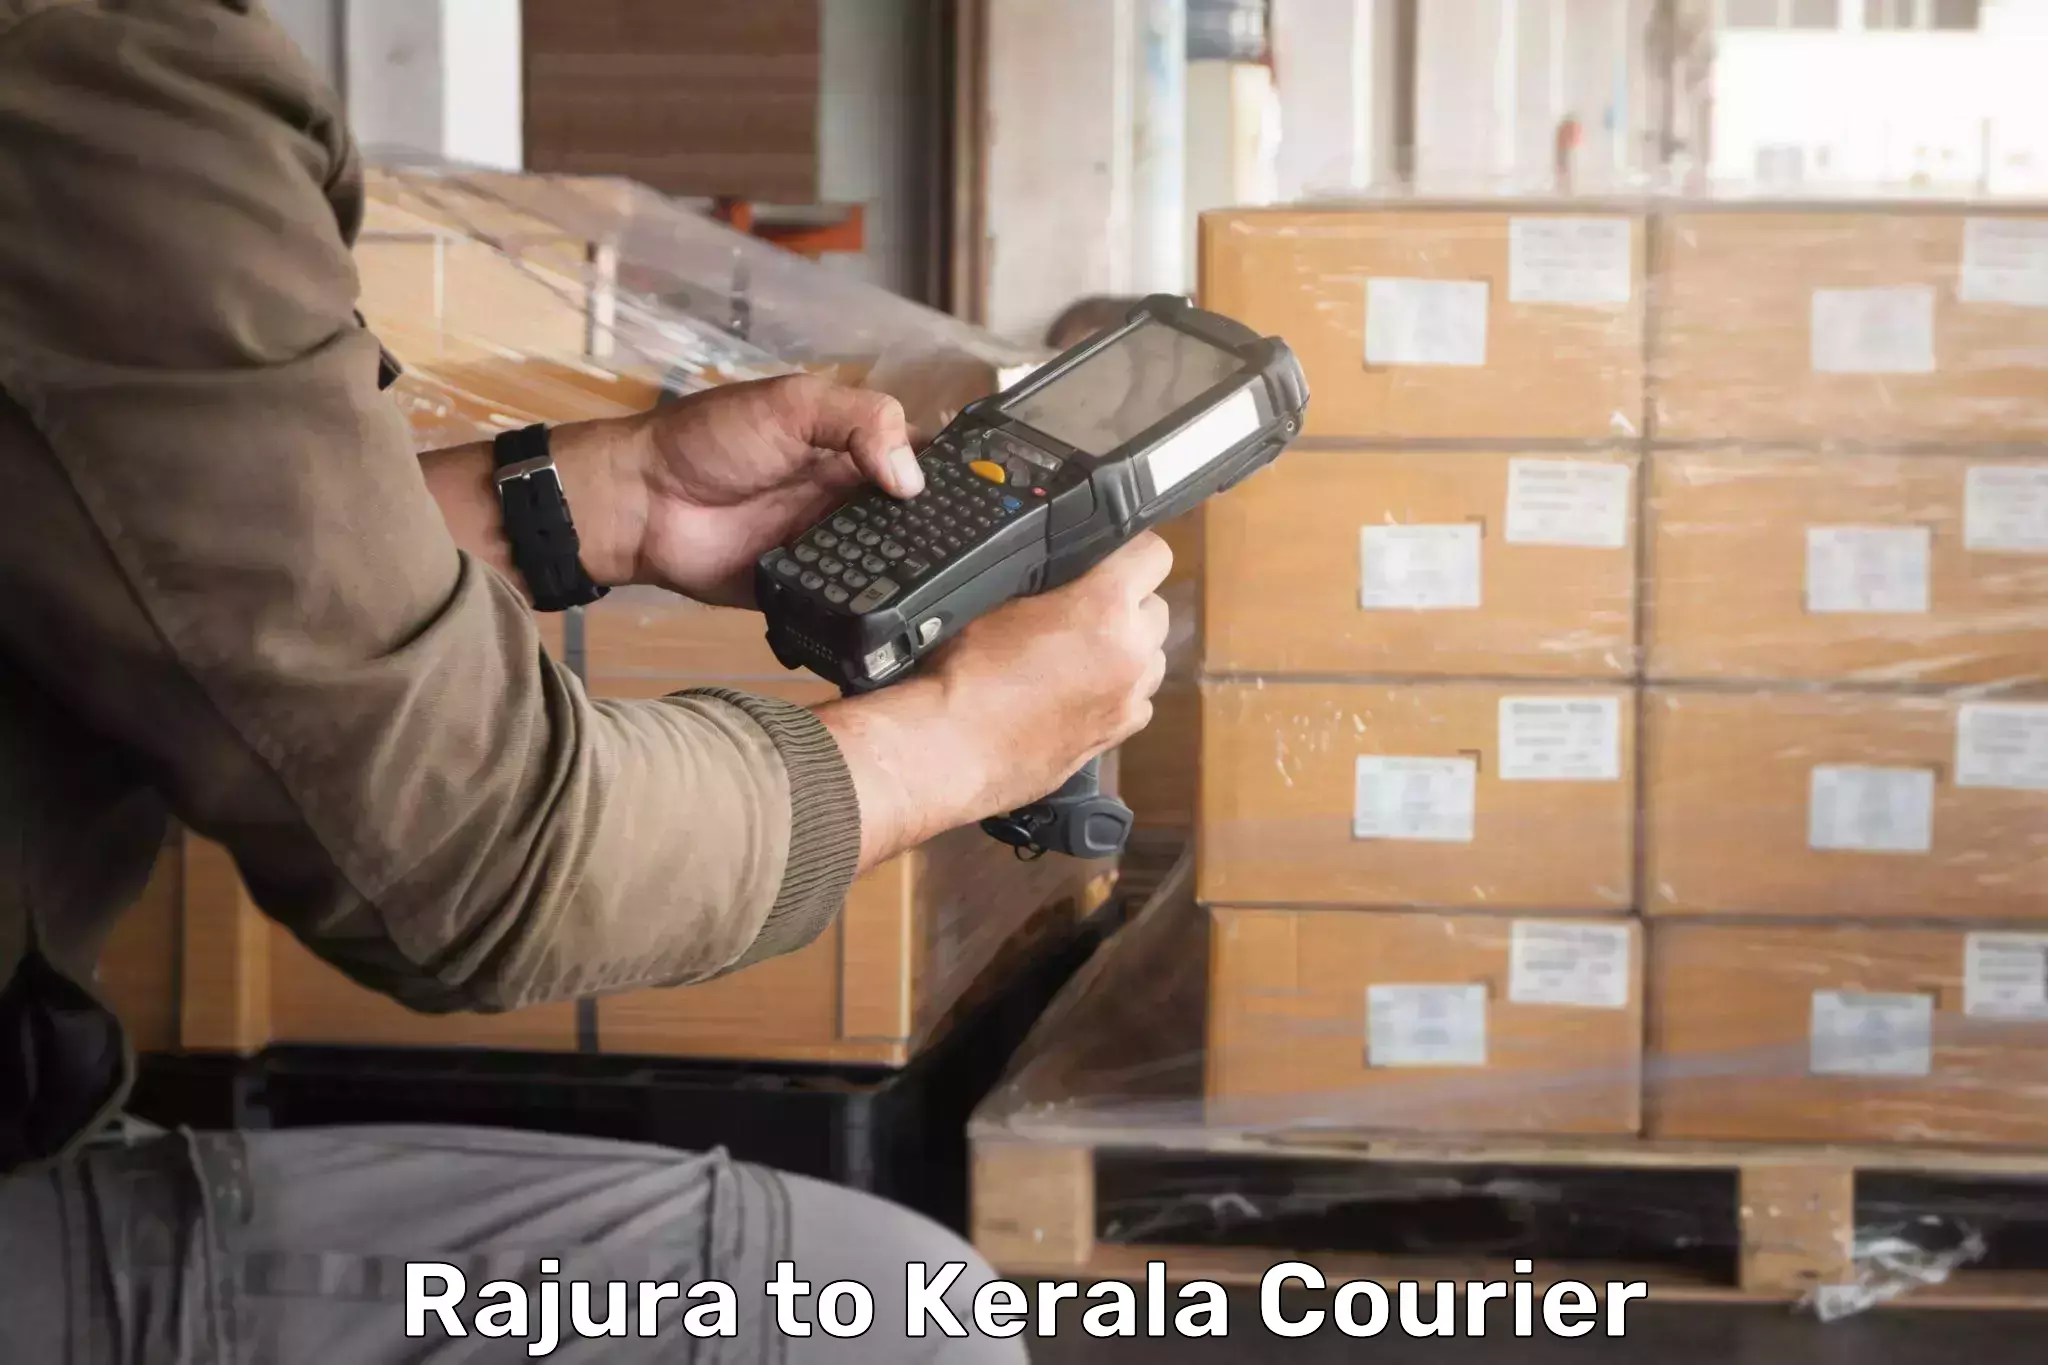 Multi-national courier services Rajura to Kochi